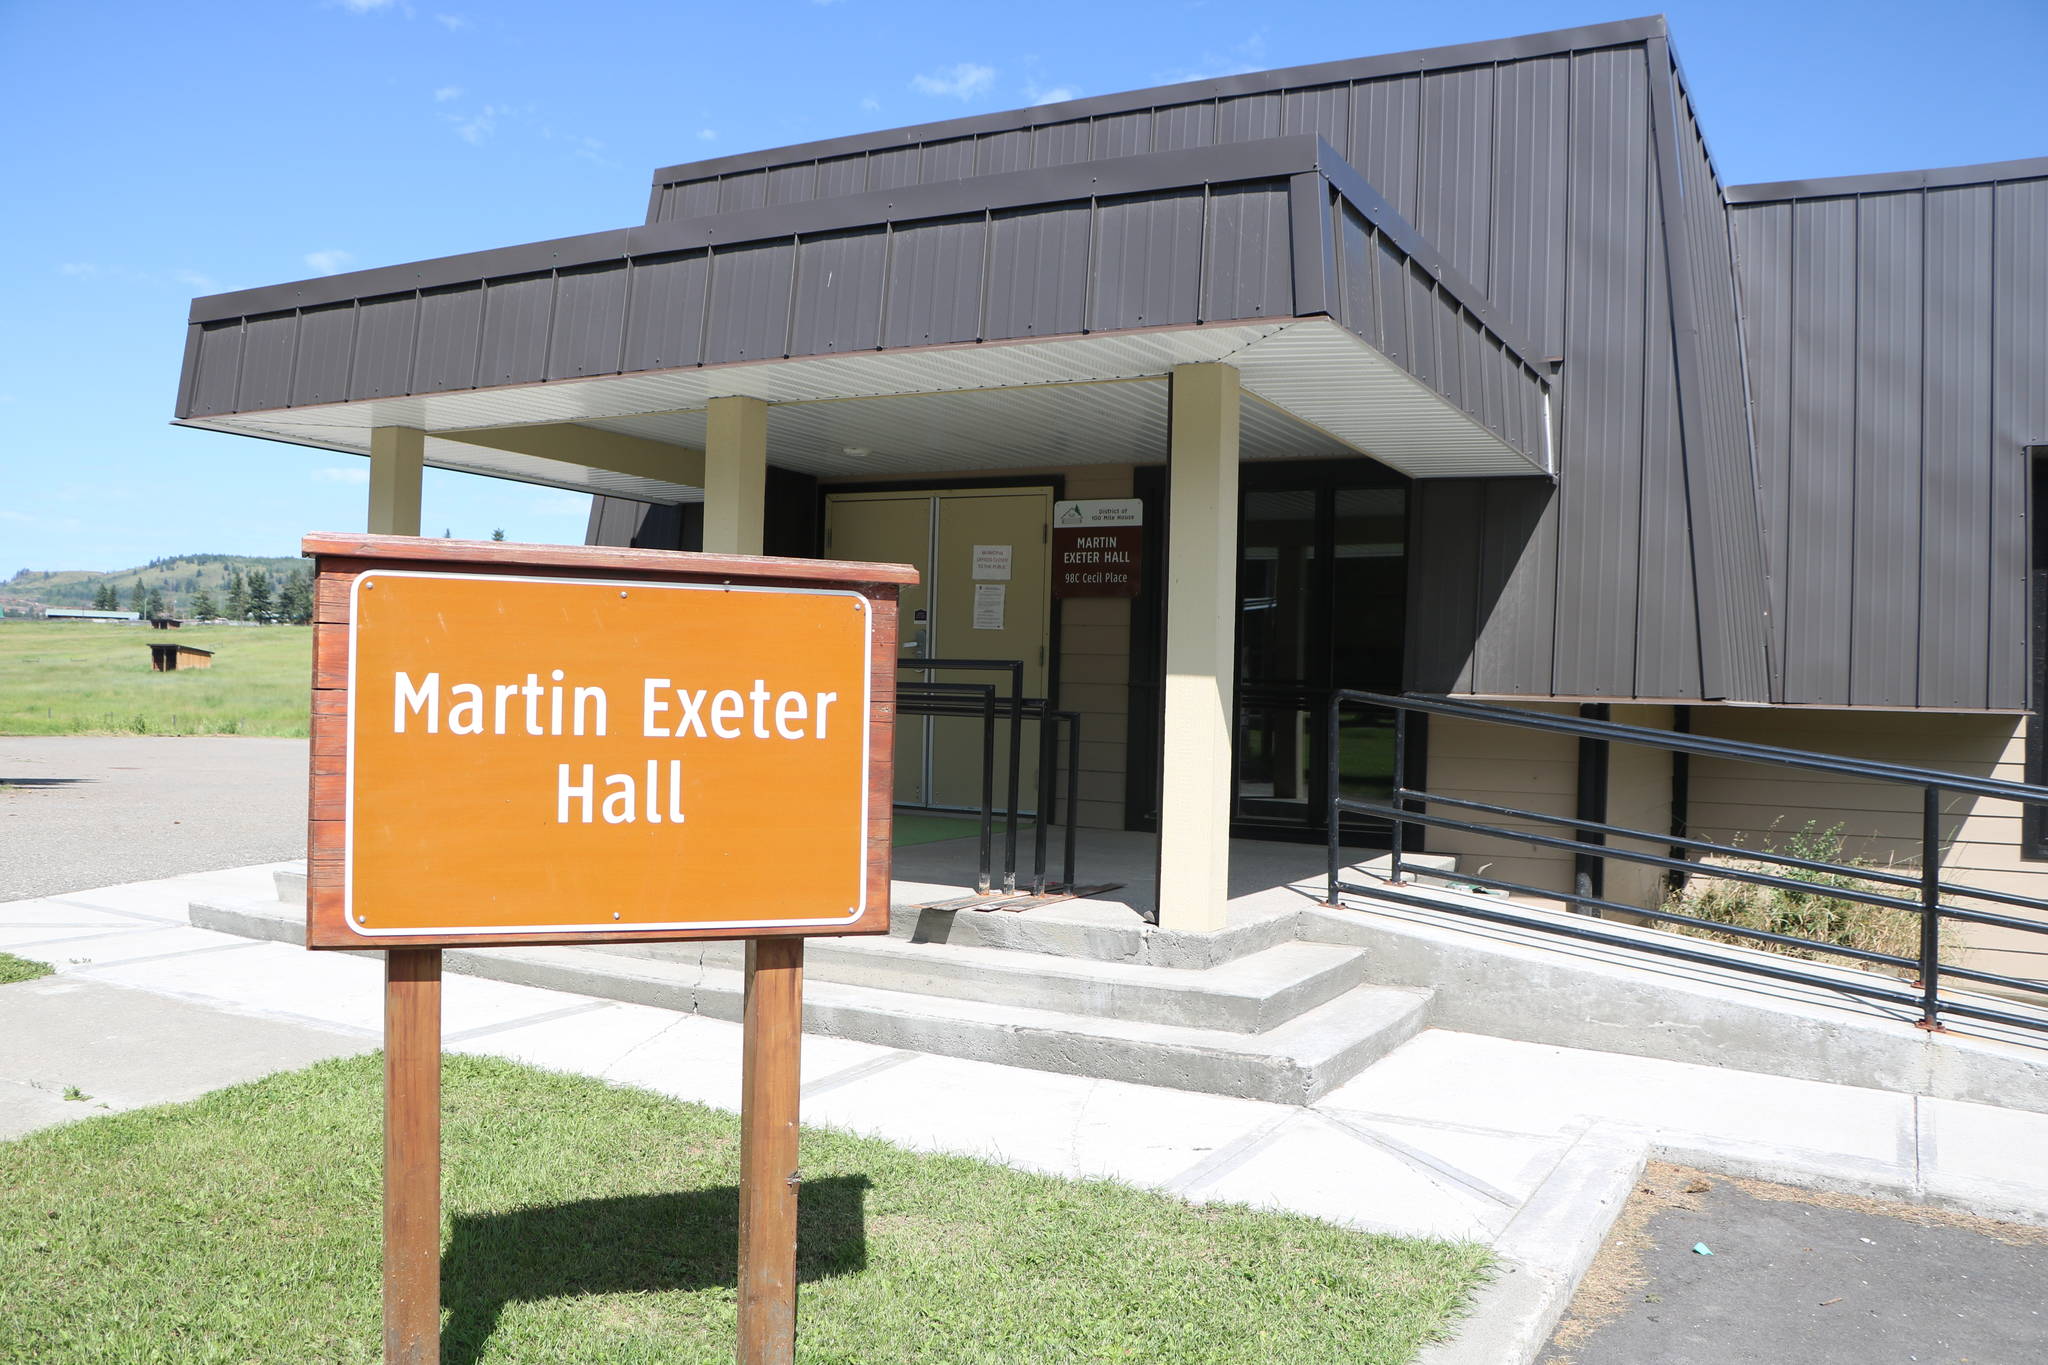 Martin Exeter Hall